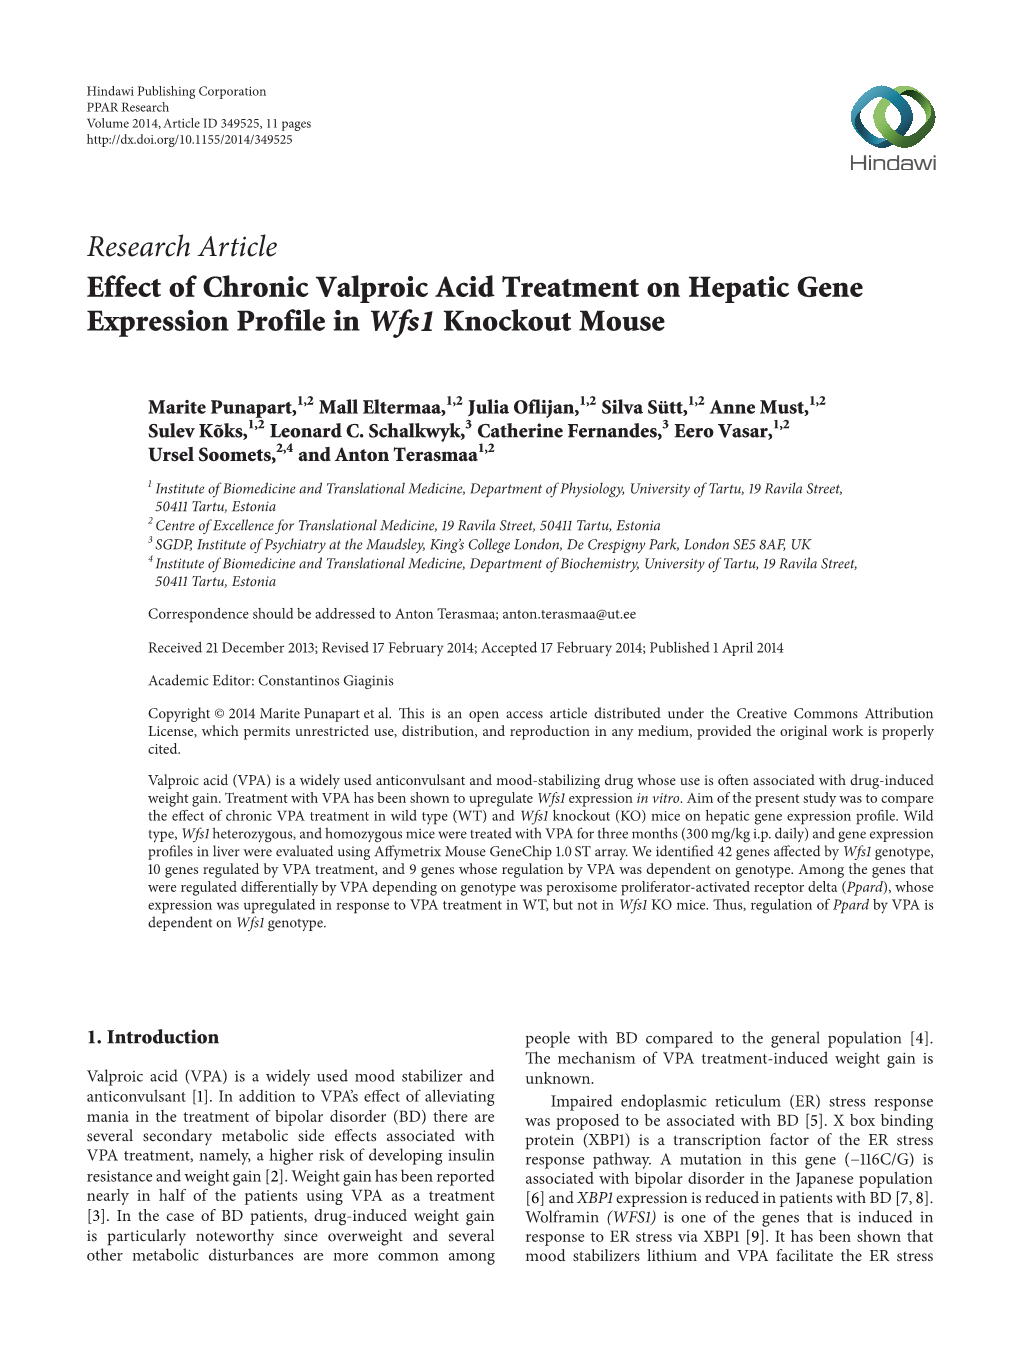 Effect of Chronic Valproic Acid Treatment on Hepatic Gene Expression Profile in Wfs1 Knockout Mouse